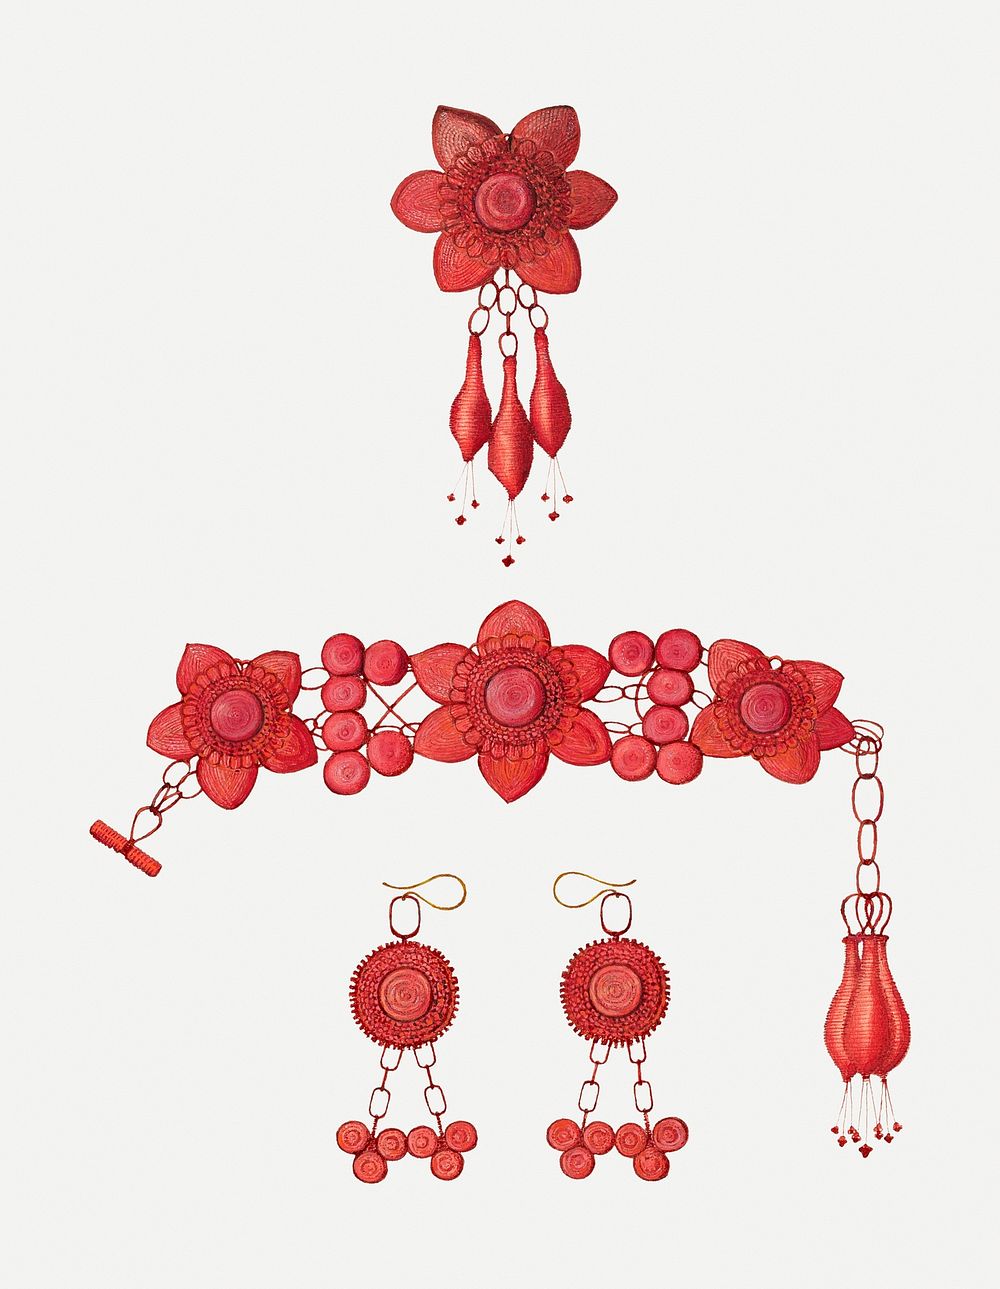 Vintage red jewelry psd, remix from artwork by William High